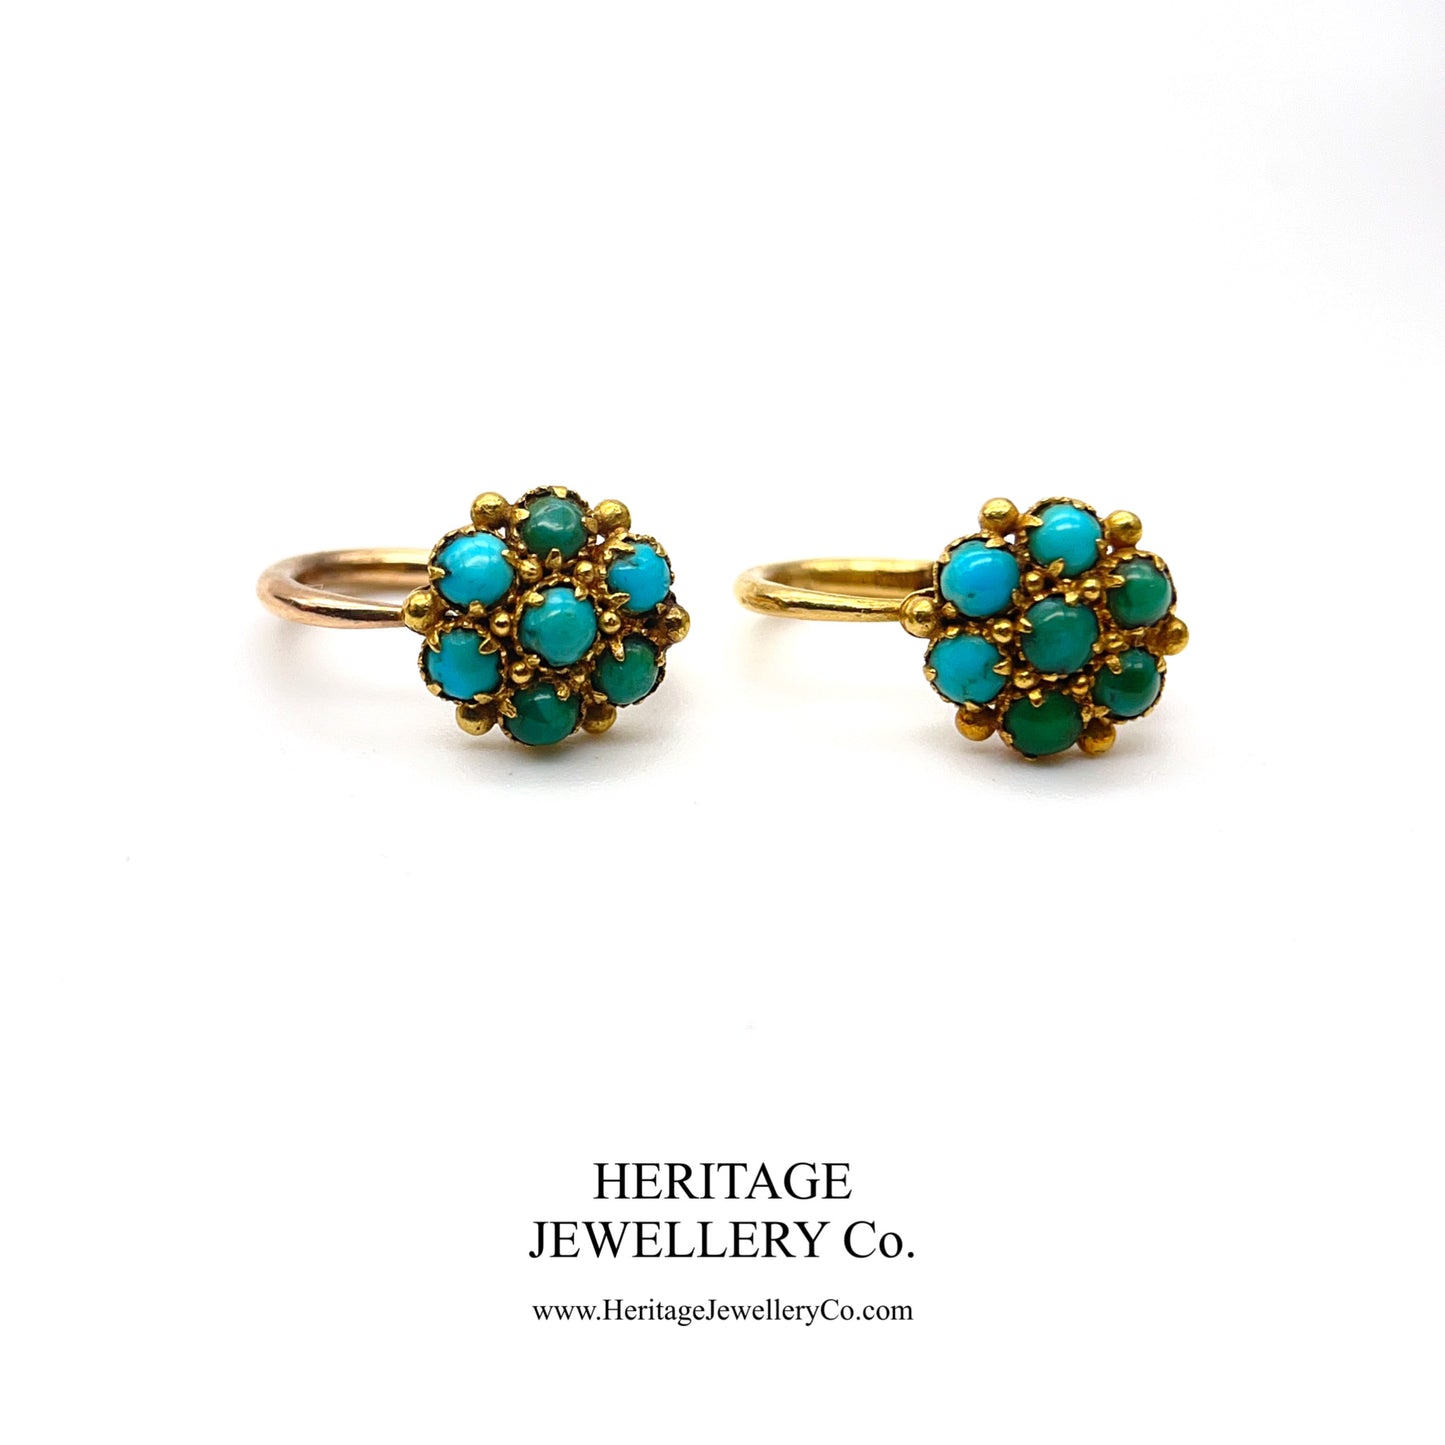 Antique 19th Century Turquoise Drop Earrings